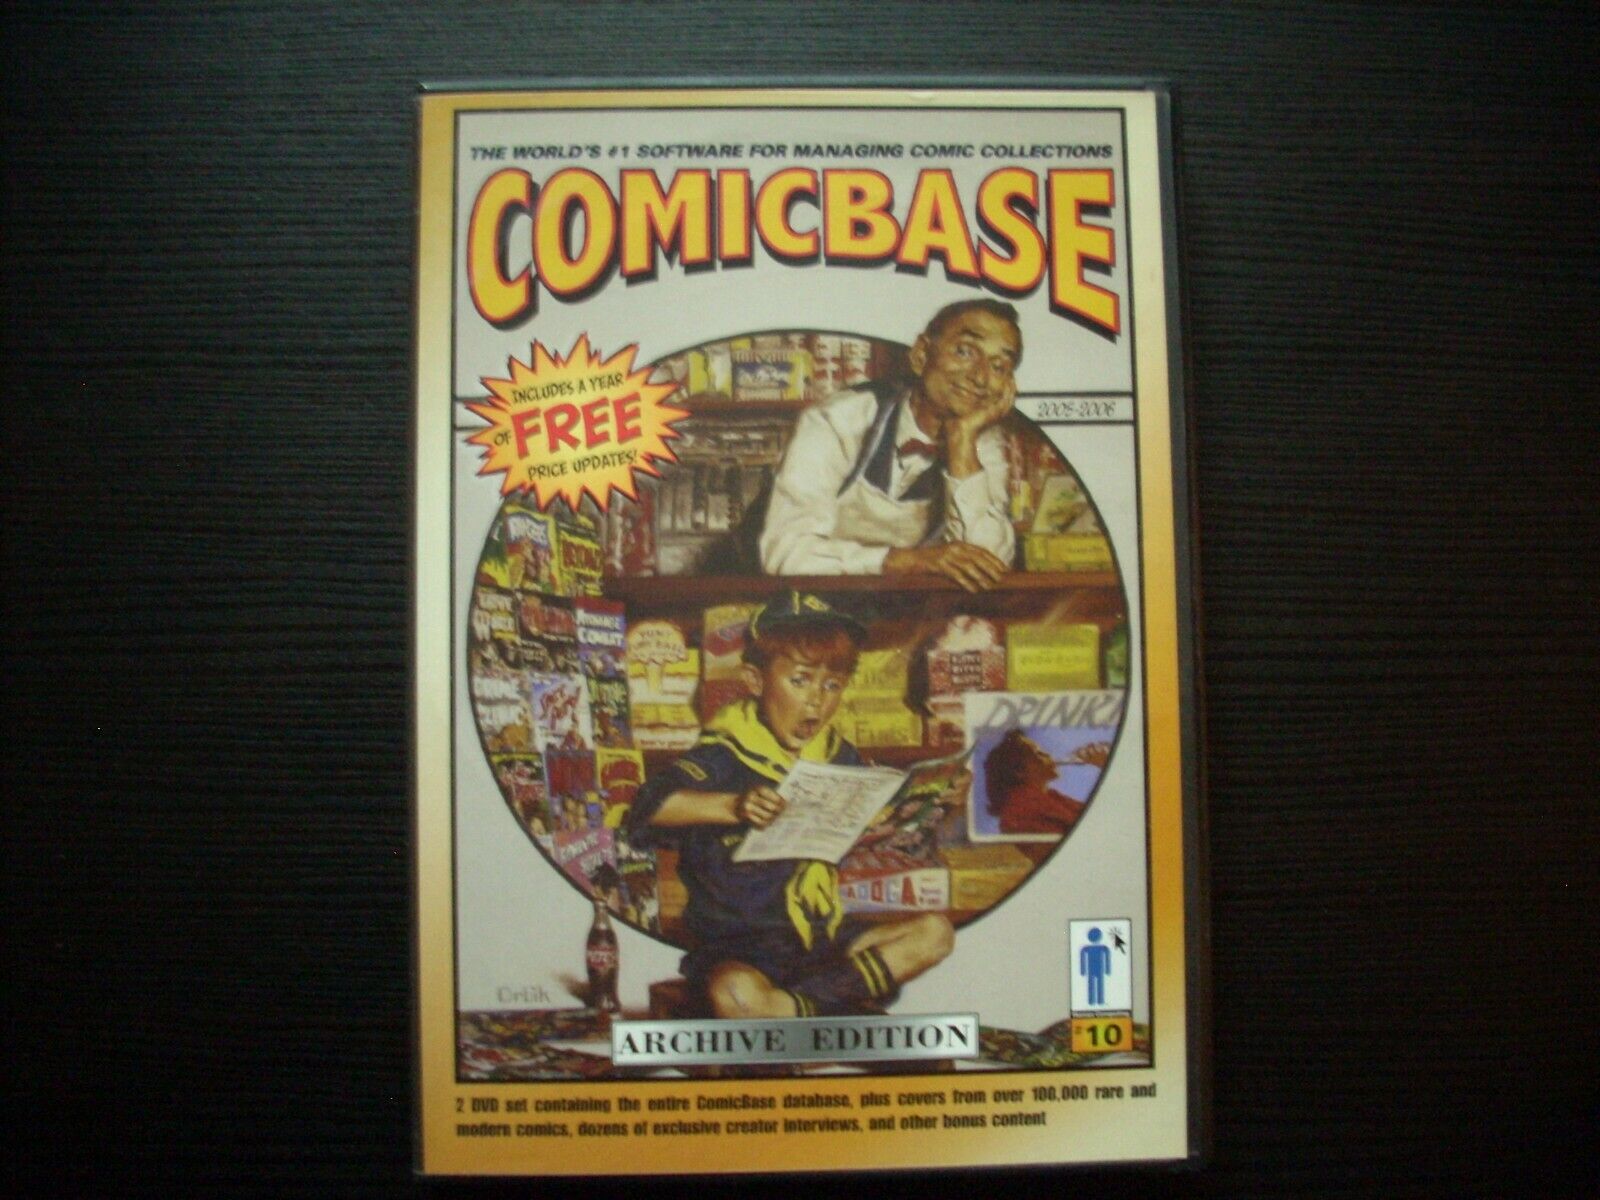 ComicBase 10 - 2005-2006 2 DVD Set (Archive Edition) AUTOGRAPHED 1 of 300 copy. 